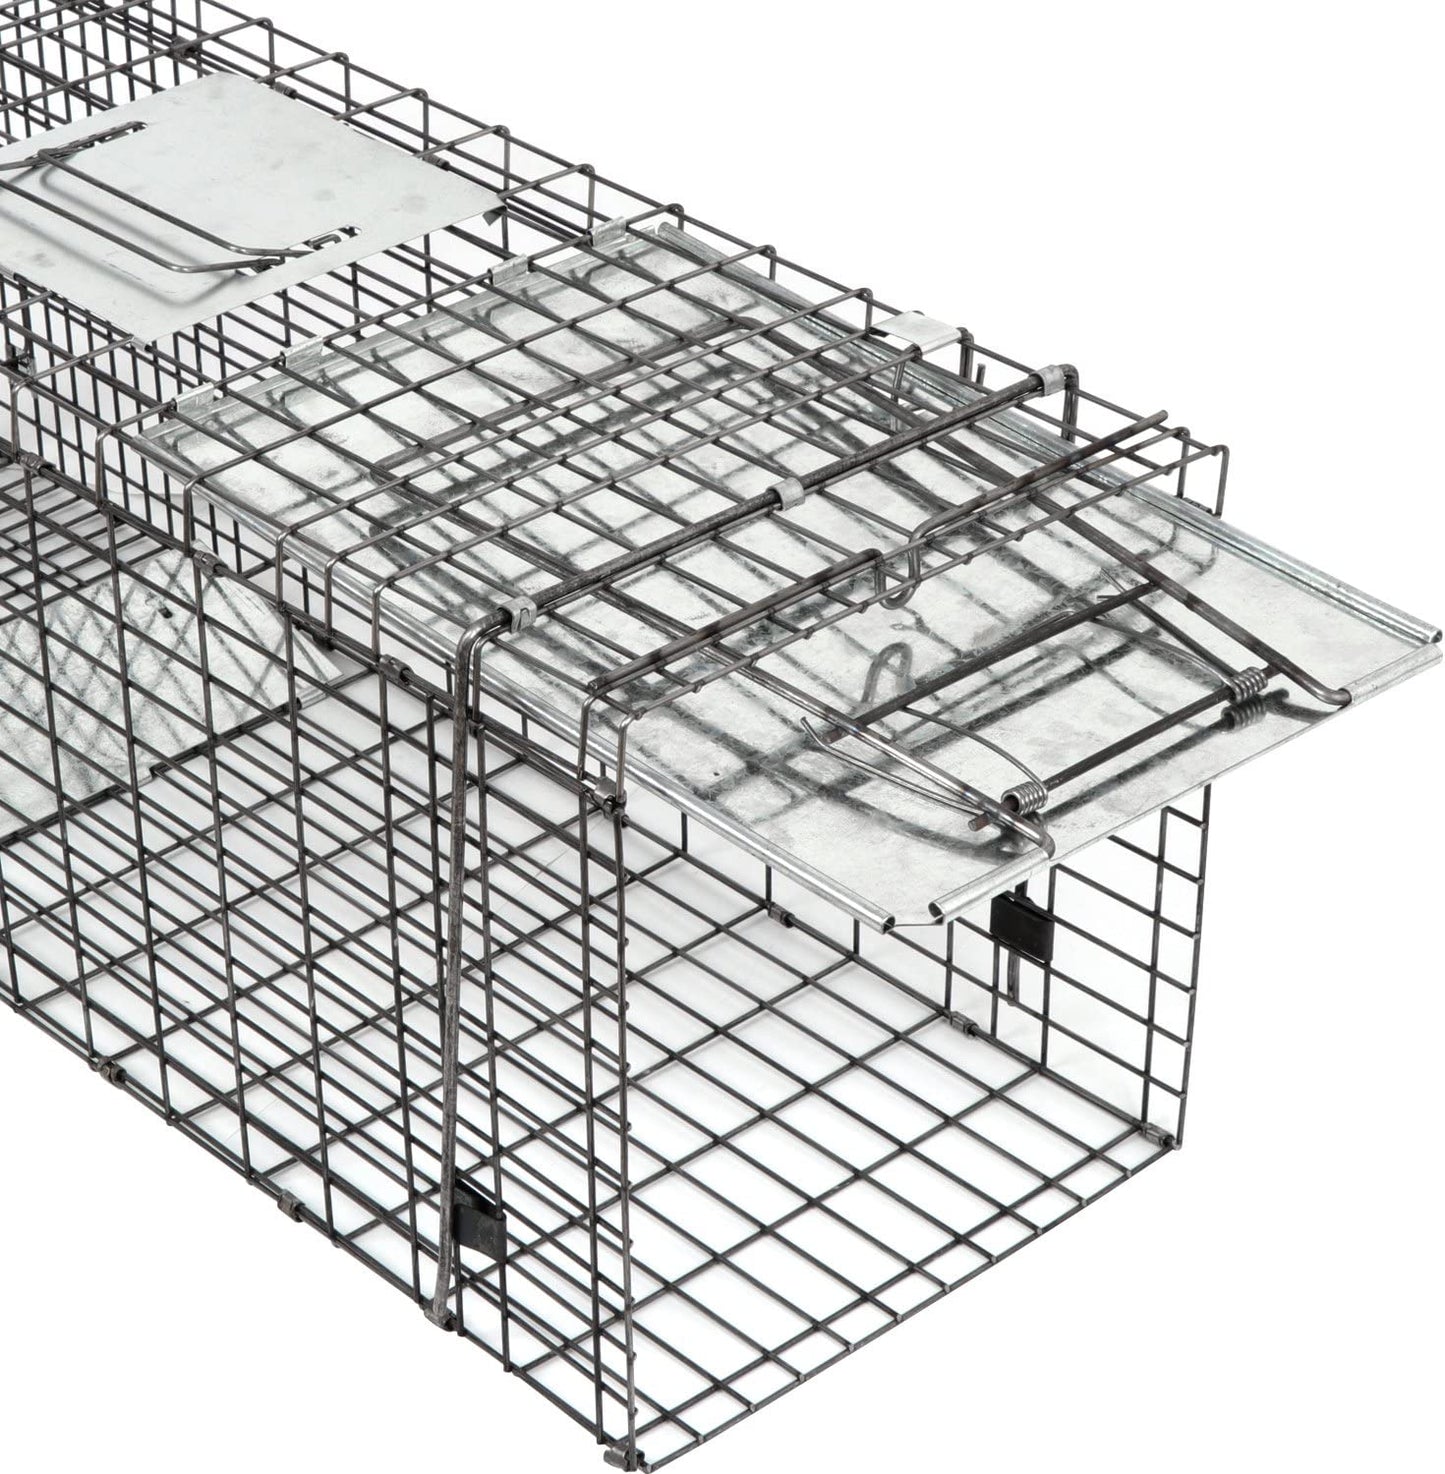 Live Animal Cage Trap 32" X 12.5" X 12" w/Iron Door Steel Cage Catch Release Humane Rodent Cage for Rabbits, Stray Cat, Squirrel, Raccoon, Mole, Gopher, Chicken, Opossum, Skunk & Chipmunks